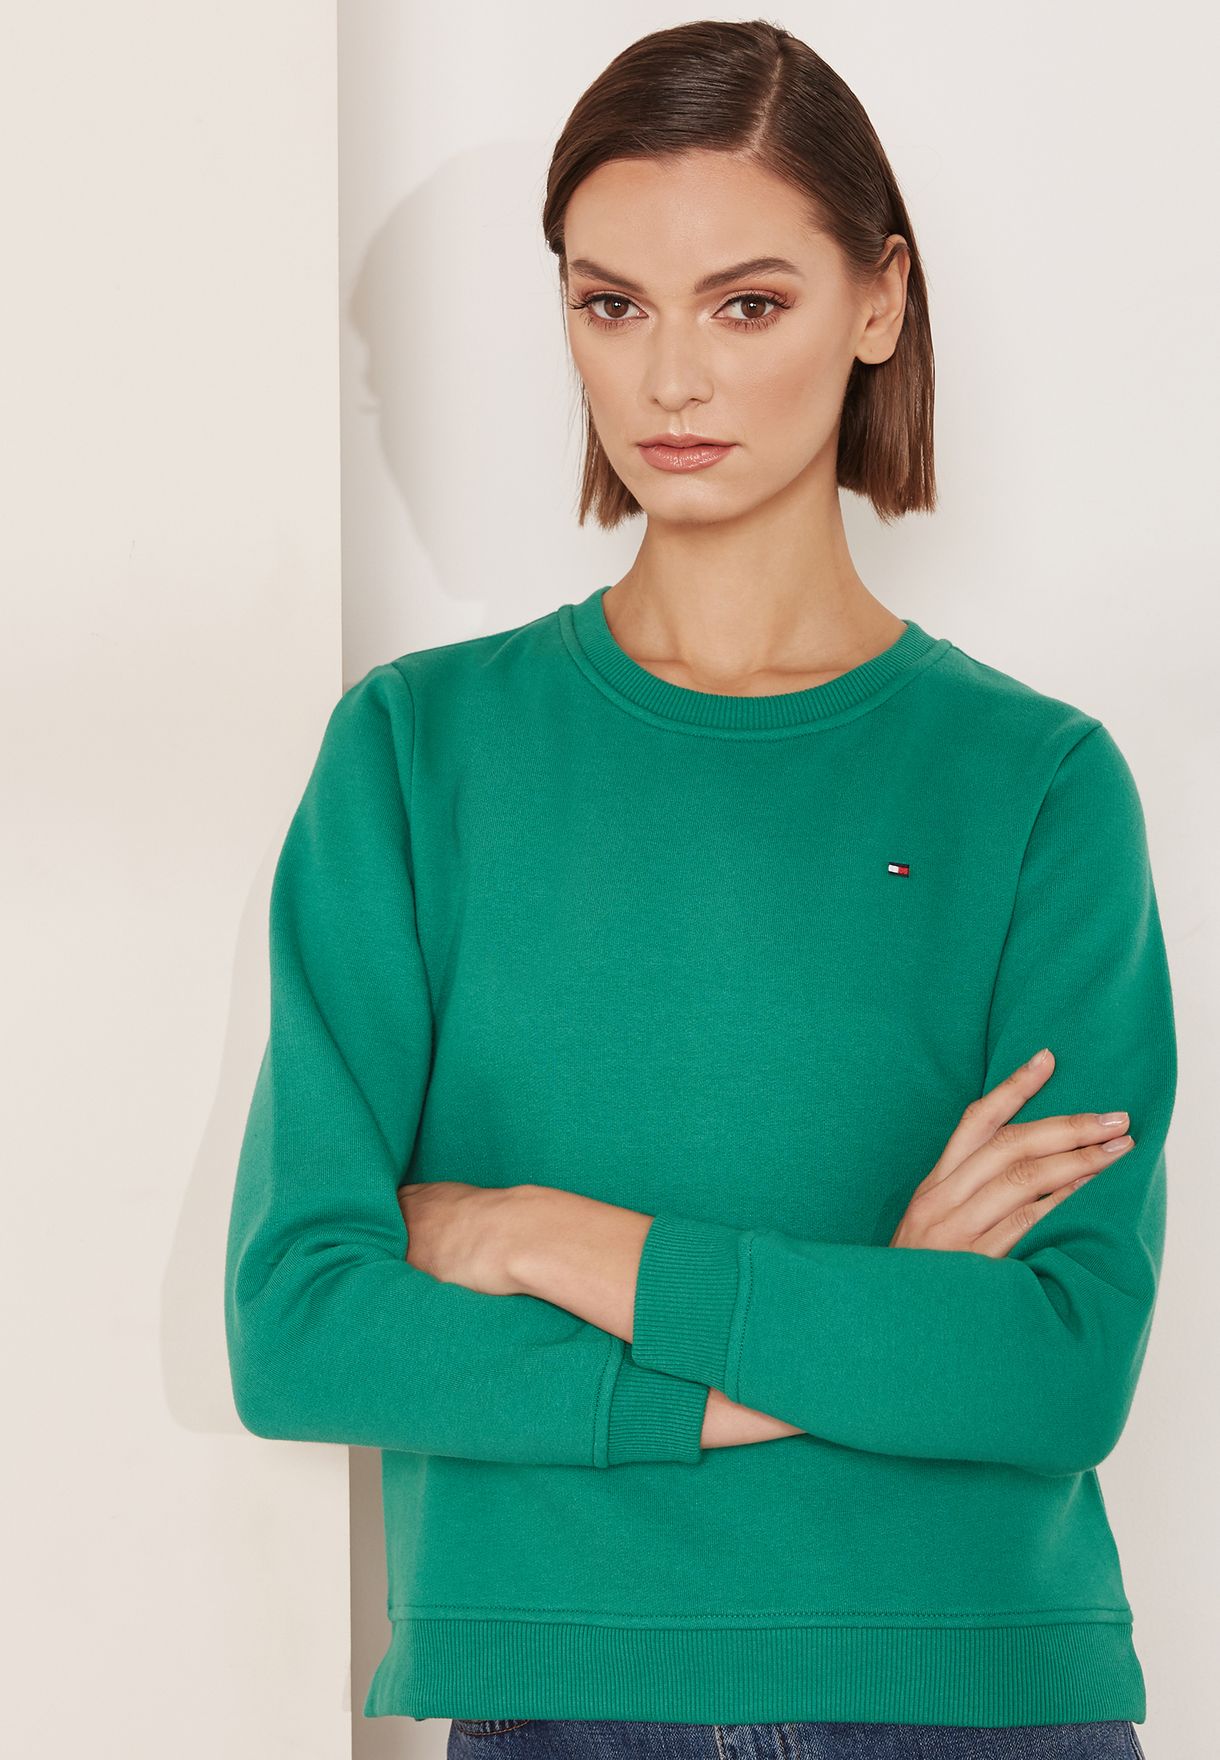 tommy hilfiger green sweater